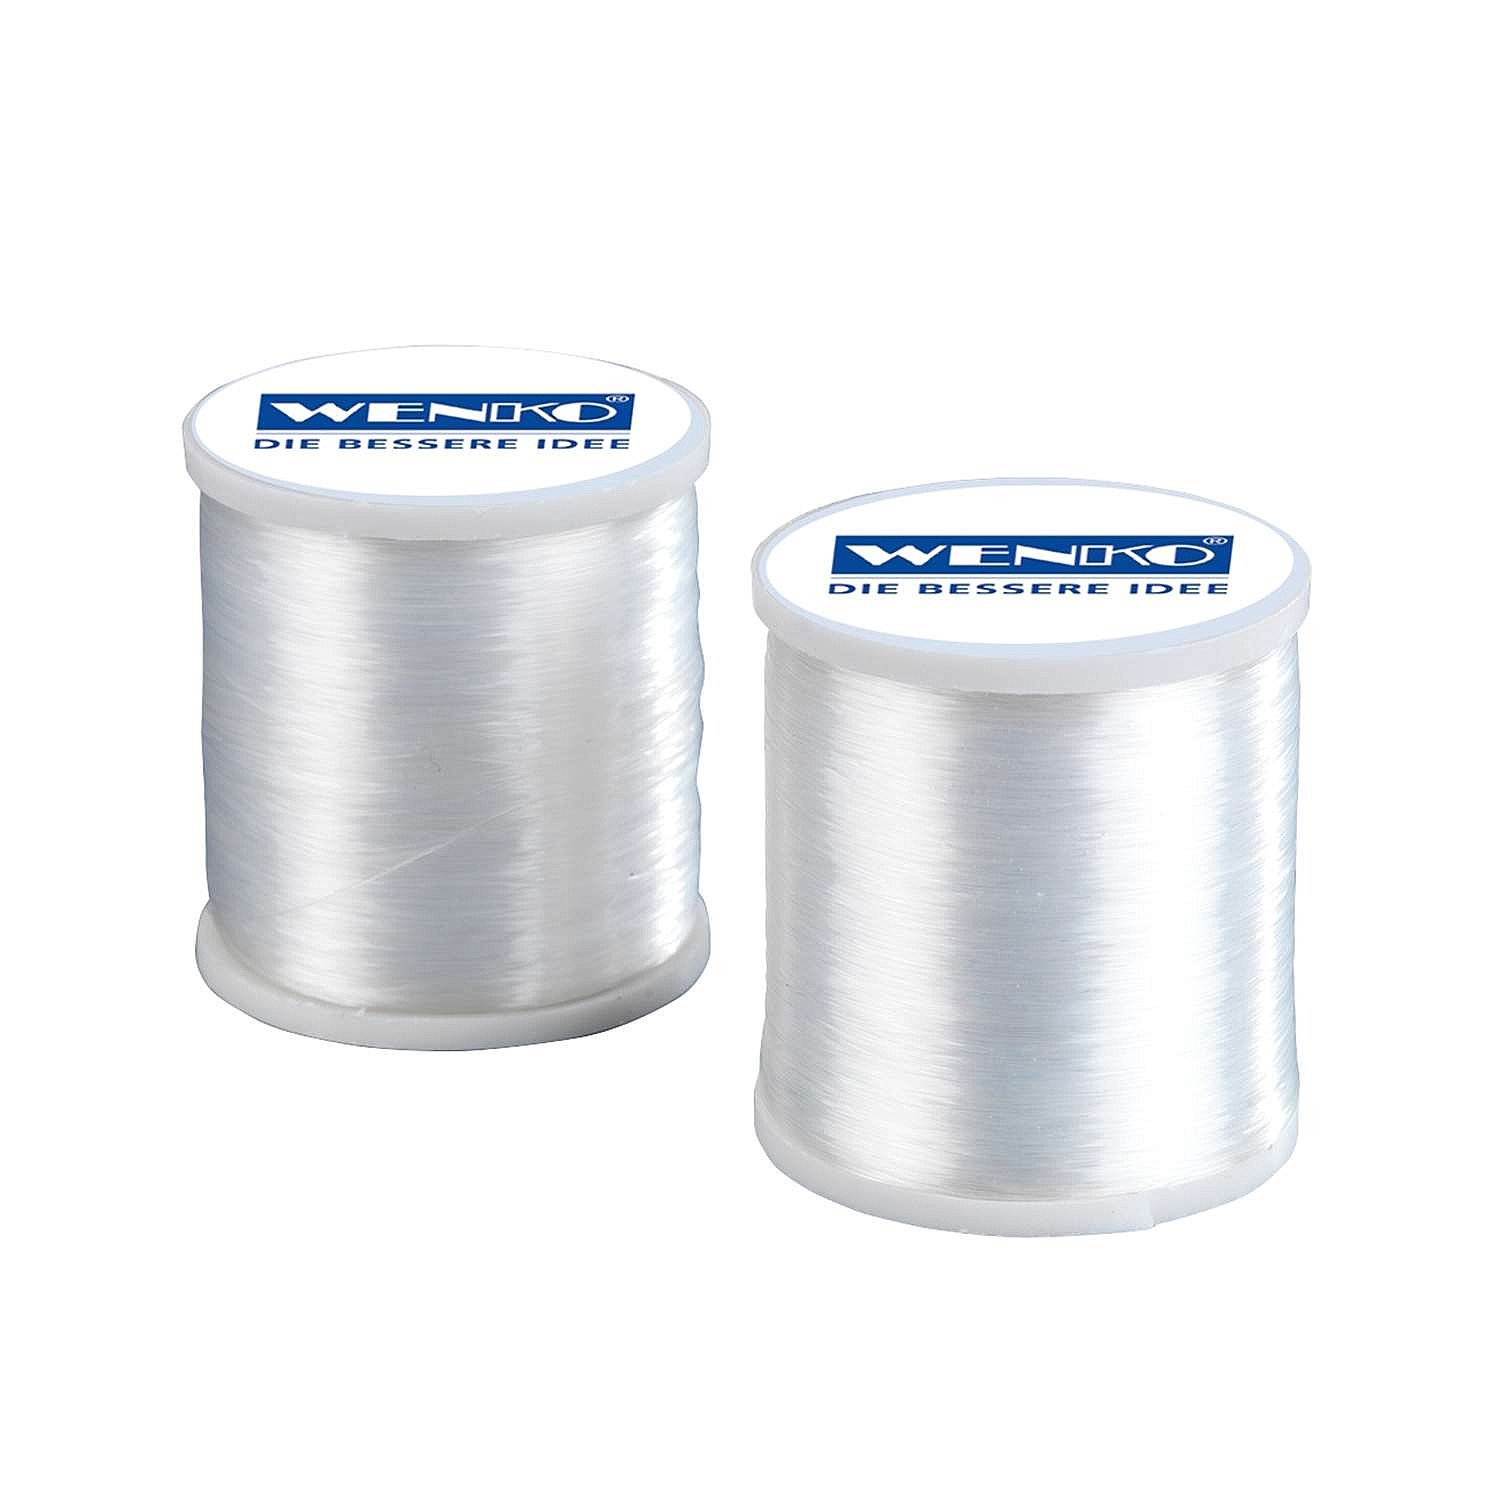 Invisible Sewing Thread - Pack of 2 - Buy 2 & Save £3